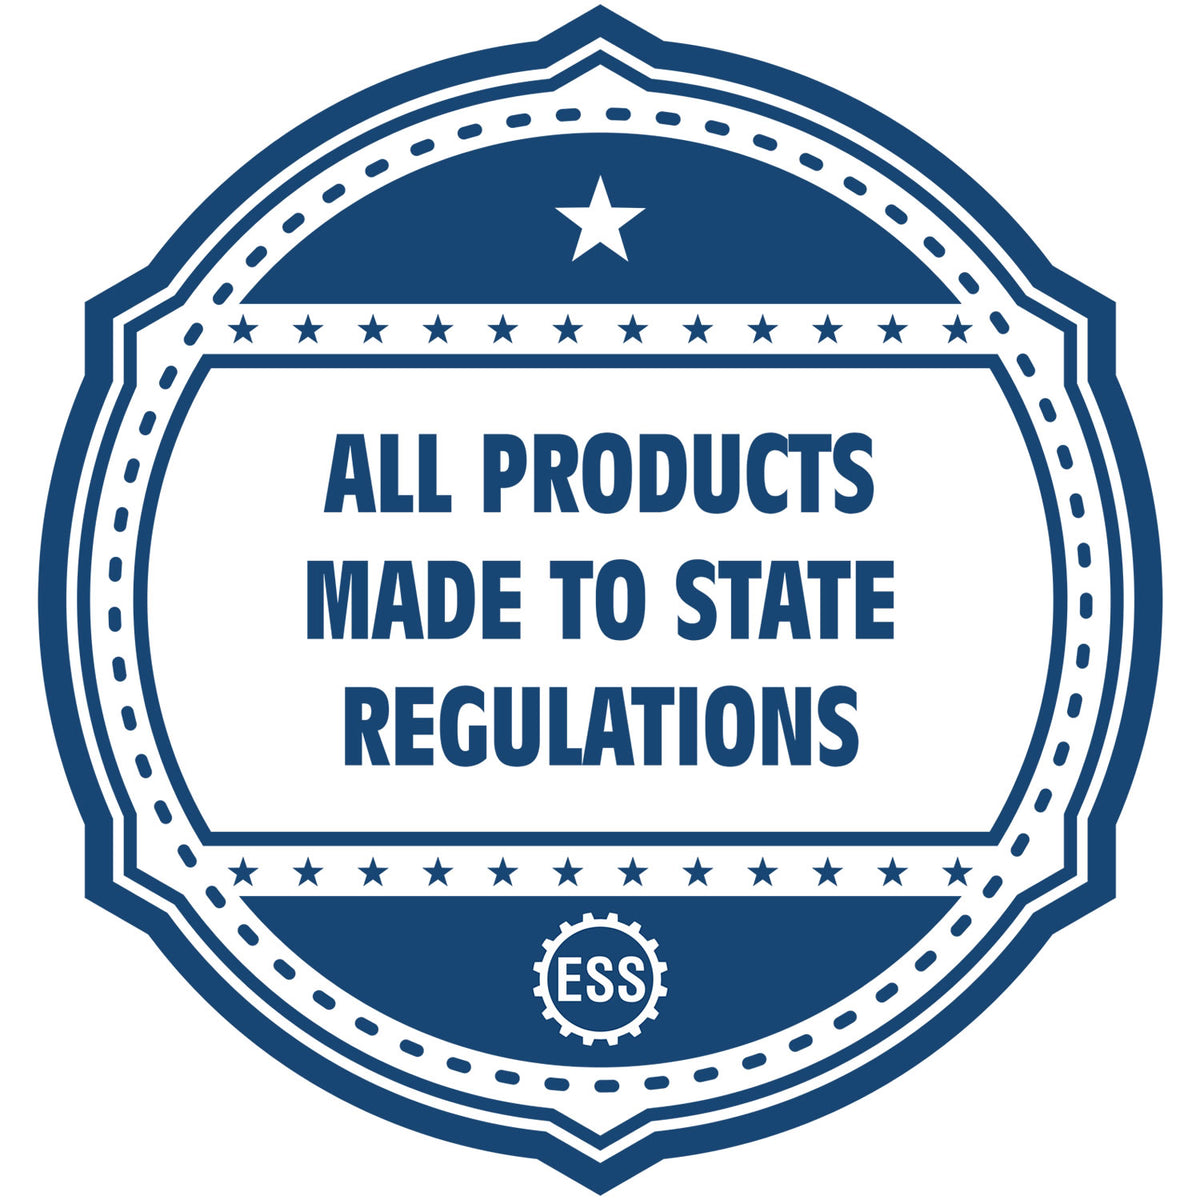 An icon or badge element for the State of Georgia Extended Long Reach Engineer Seal showing that this product is made in compliance with state regulations.